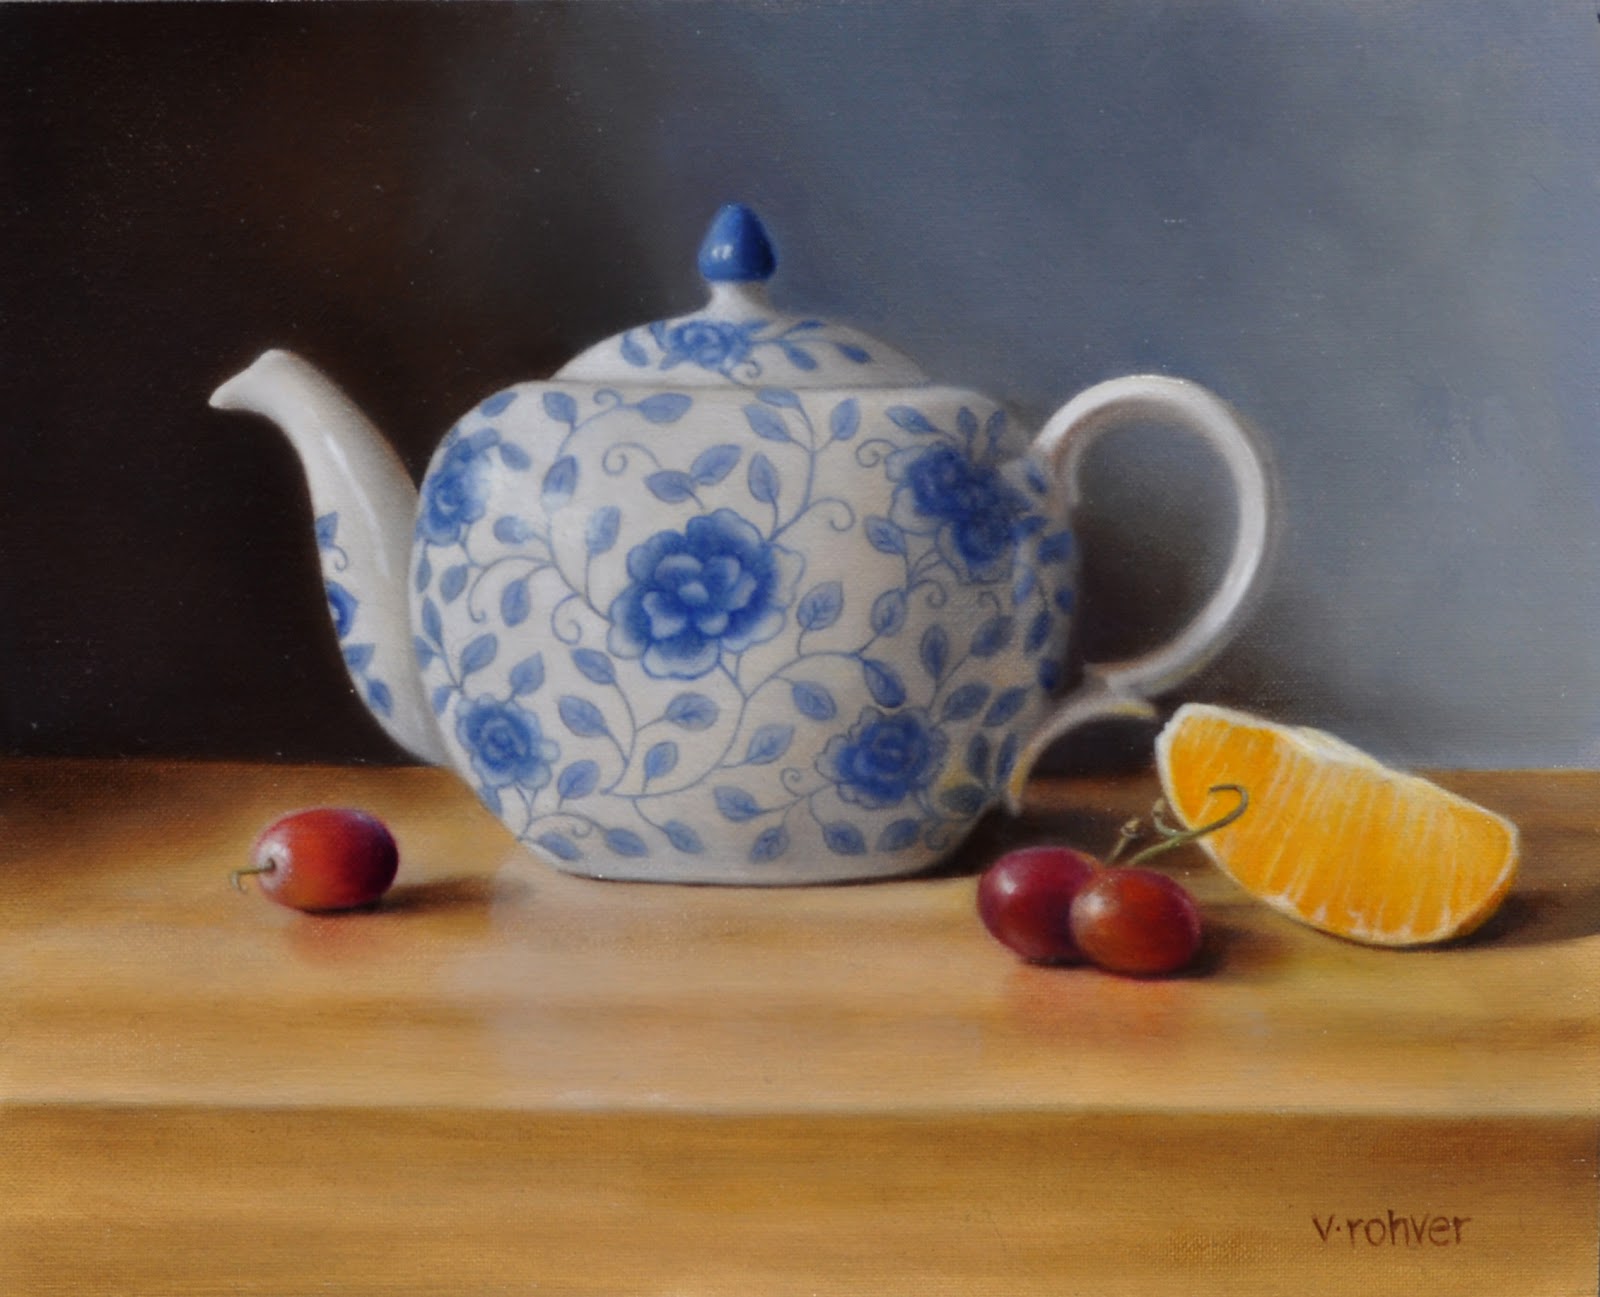 The Blue and White Teapot